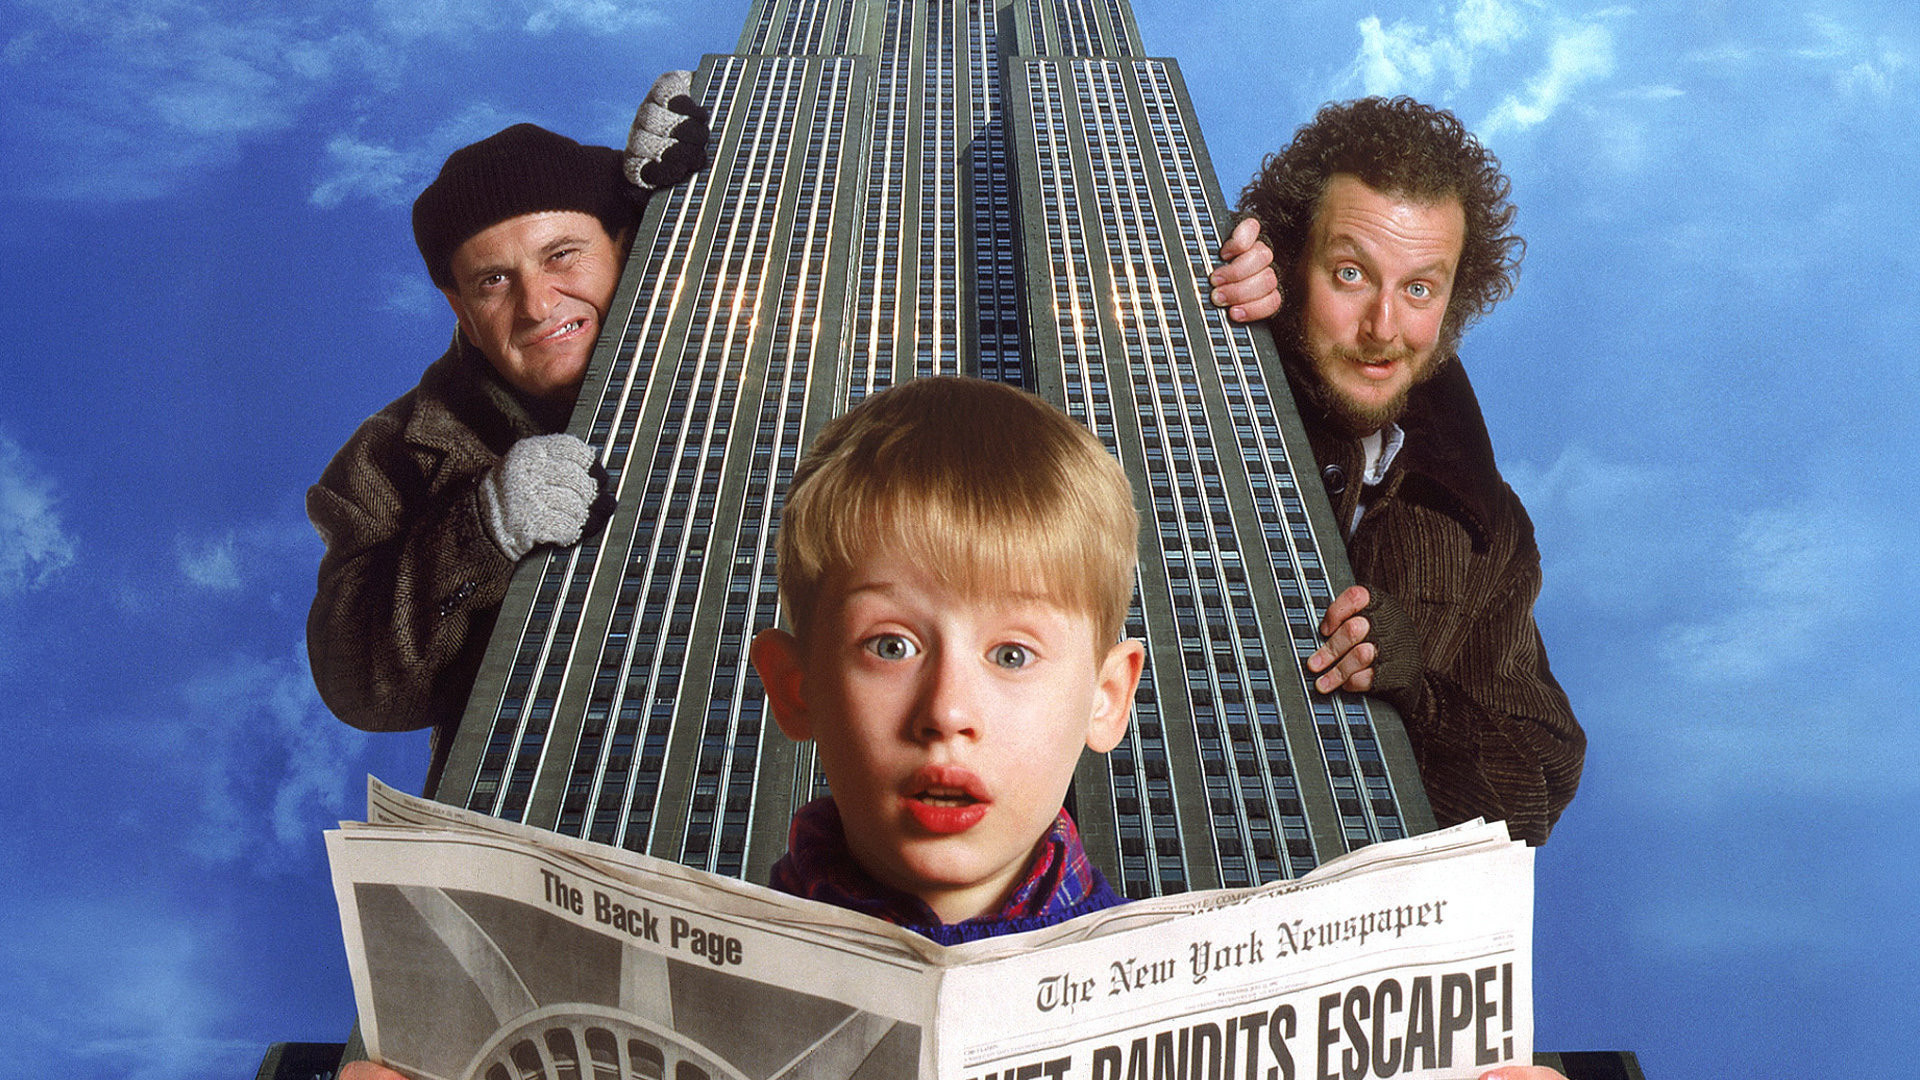 Home Alone 2, Lost in New York, movie hd wallpapers, 1920x1080 Full HD Desktop